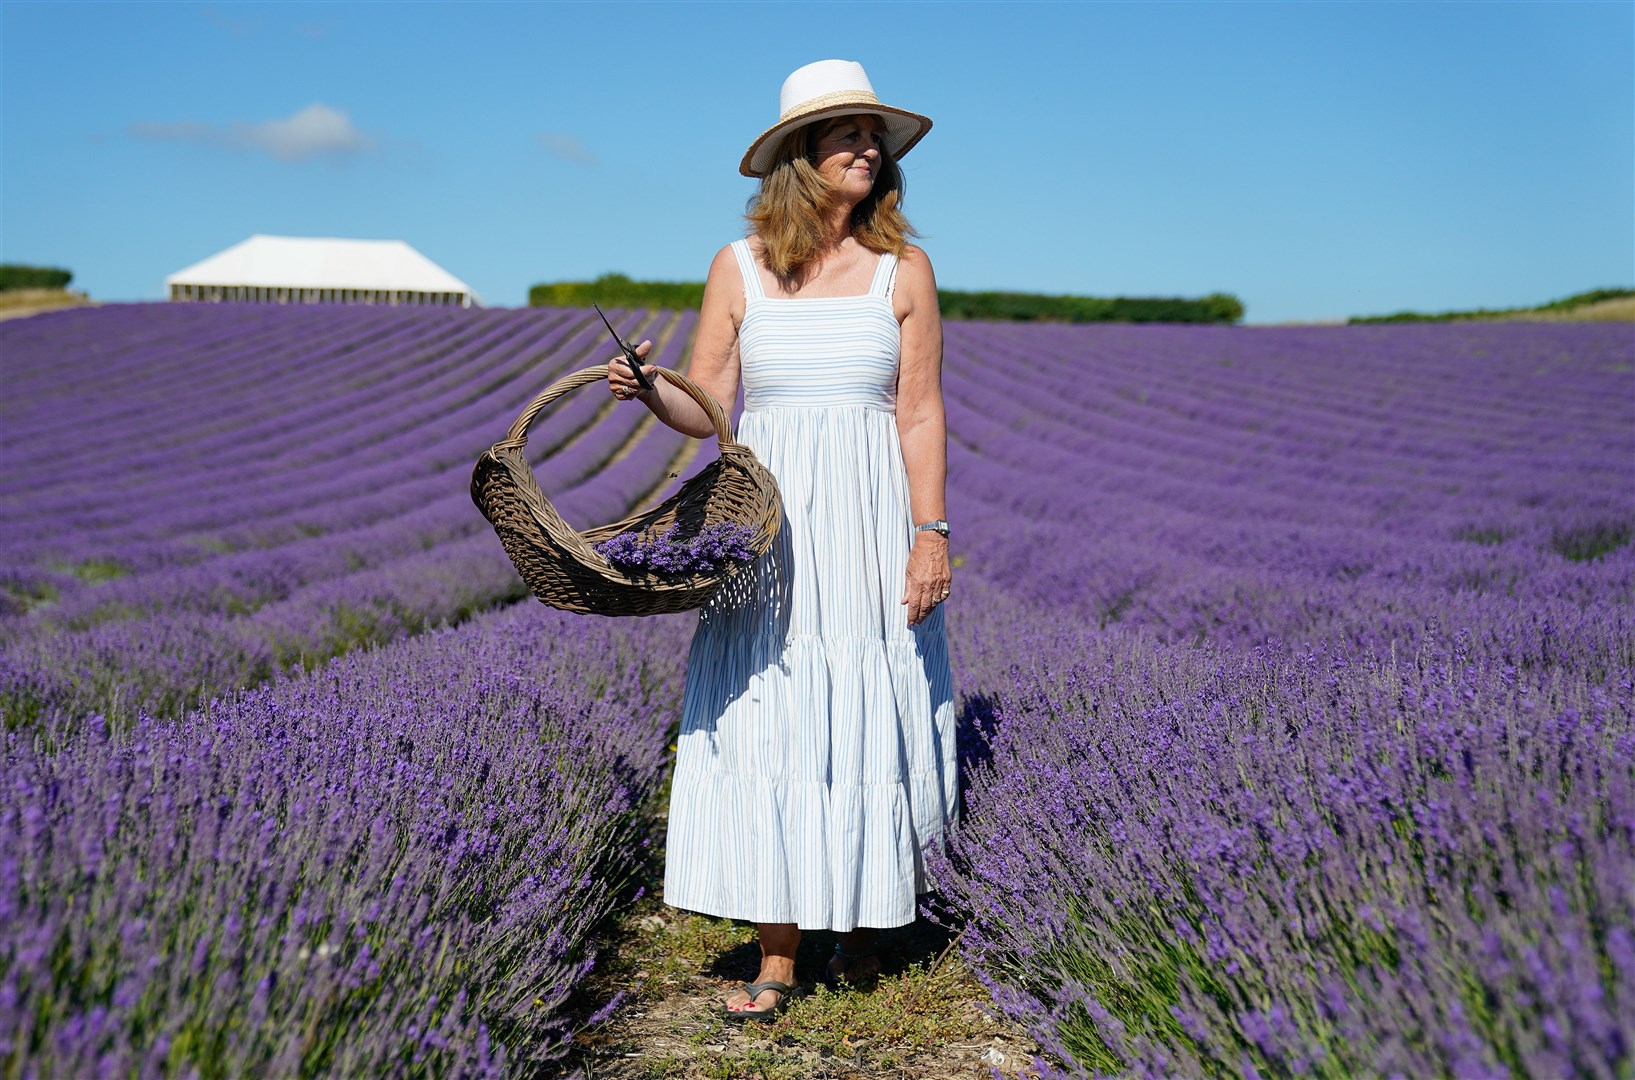 Rosie Elms, co-owner of Lordington Lavender in West Sussex, gathers bunches of lavender on her and her husband’s farm near Chichester (Andrew Matthews/PA)